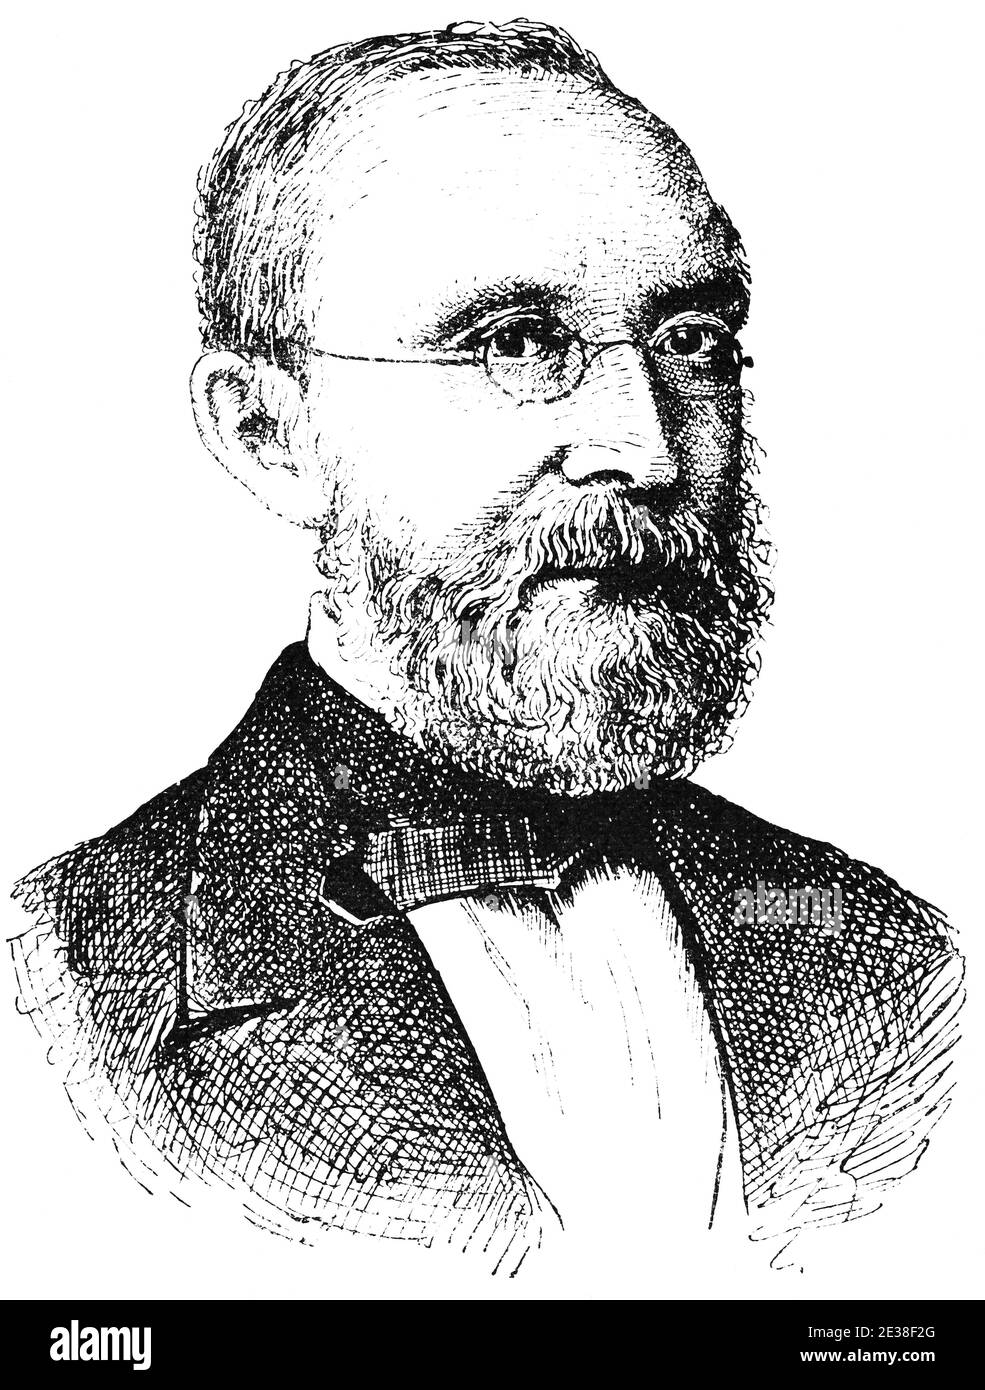 Portrait of Rudolf Ludwig Carl Virchow - a German physician, anthropologist, pathologist, prehistorian, biologist, writer, editor, and politician. Illustration of the 19th century. Germany. White background. Stock Photo